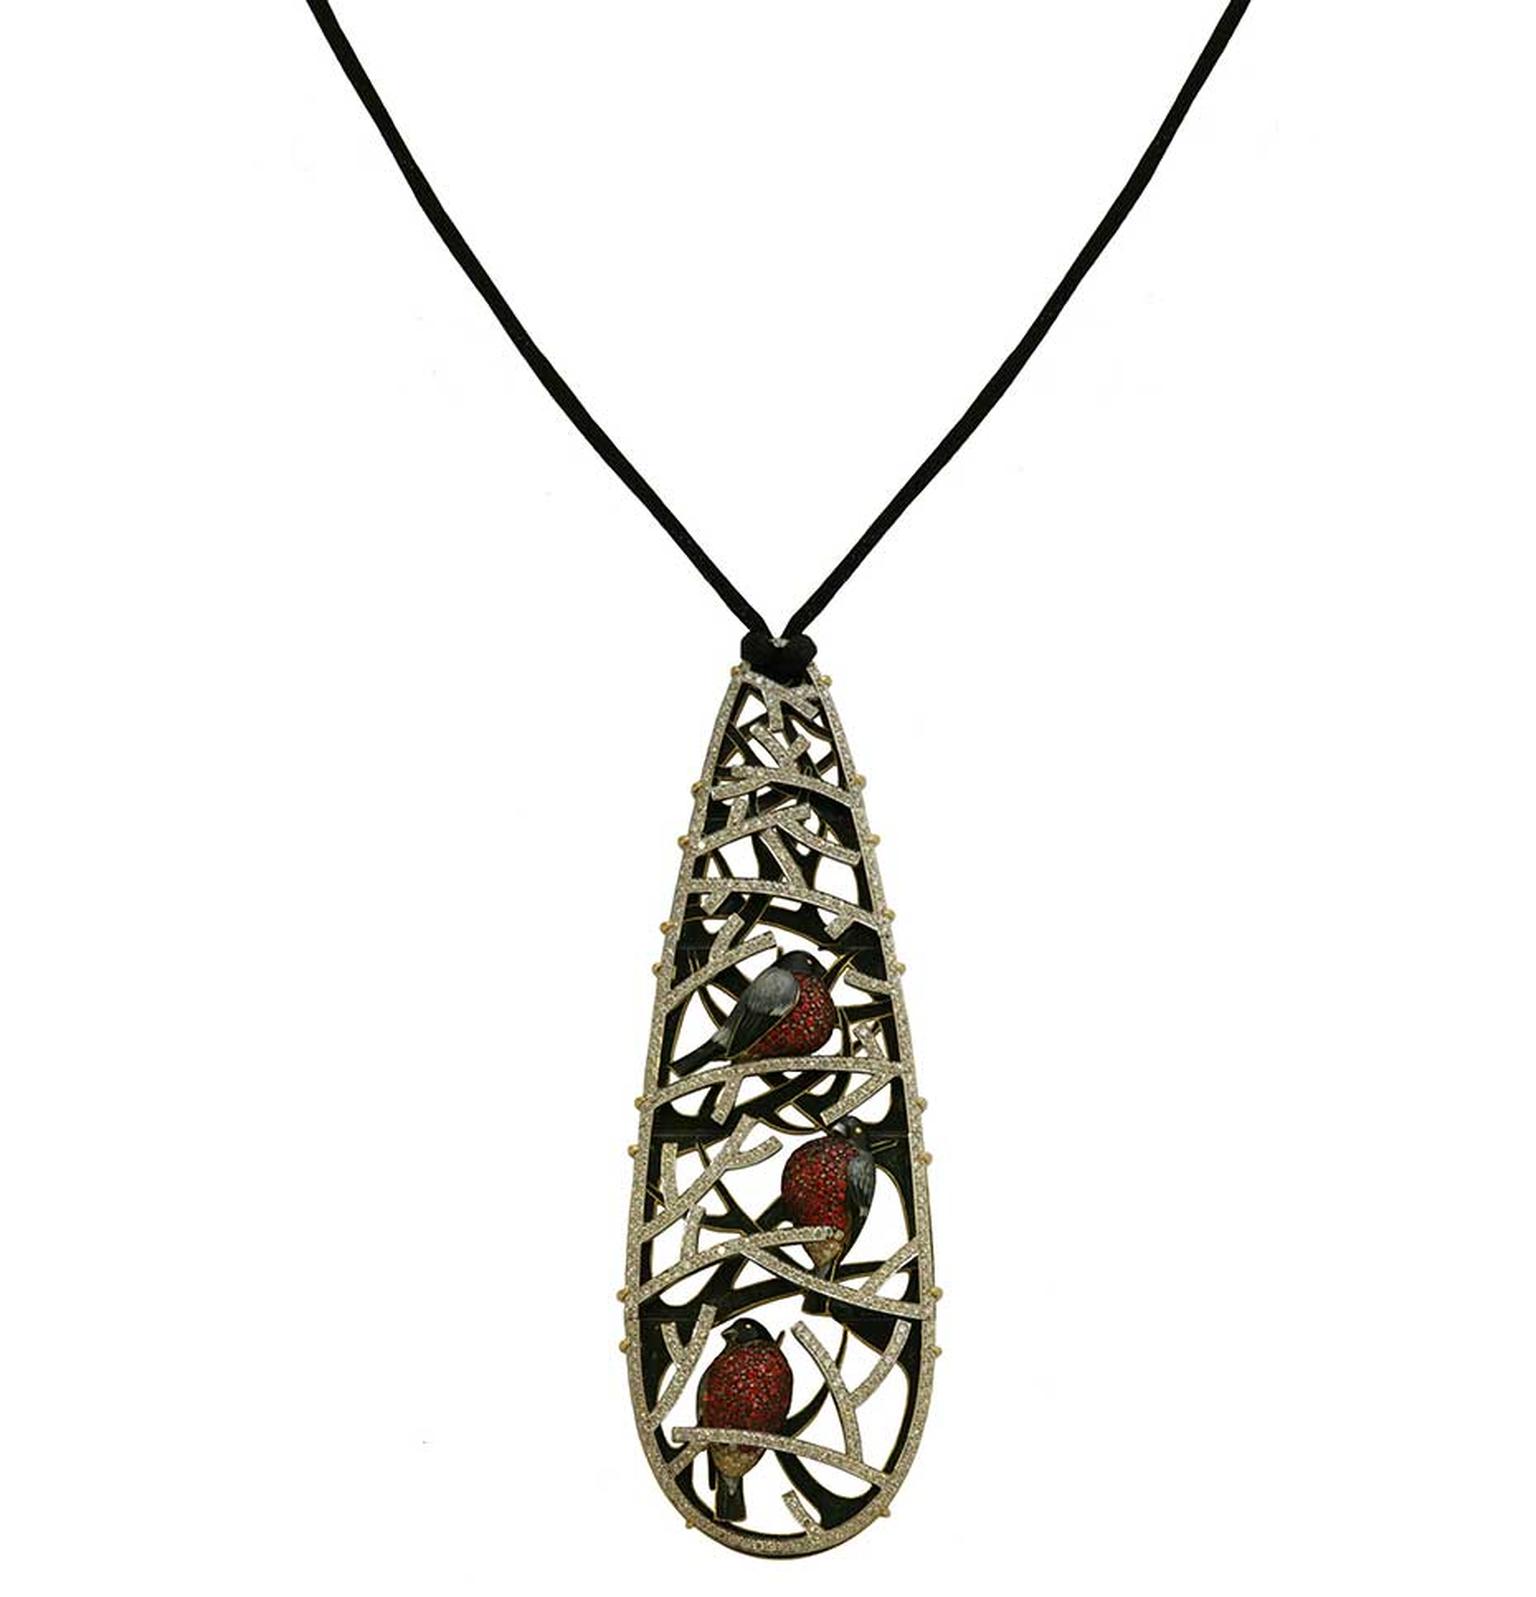 Ilgiz F's "Bullfinches" pendant, which earned the Russian jeweller the title of "Champion of the Champions" at the 2011 International Jewellery Design Excellence Awards in Hong Kong